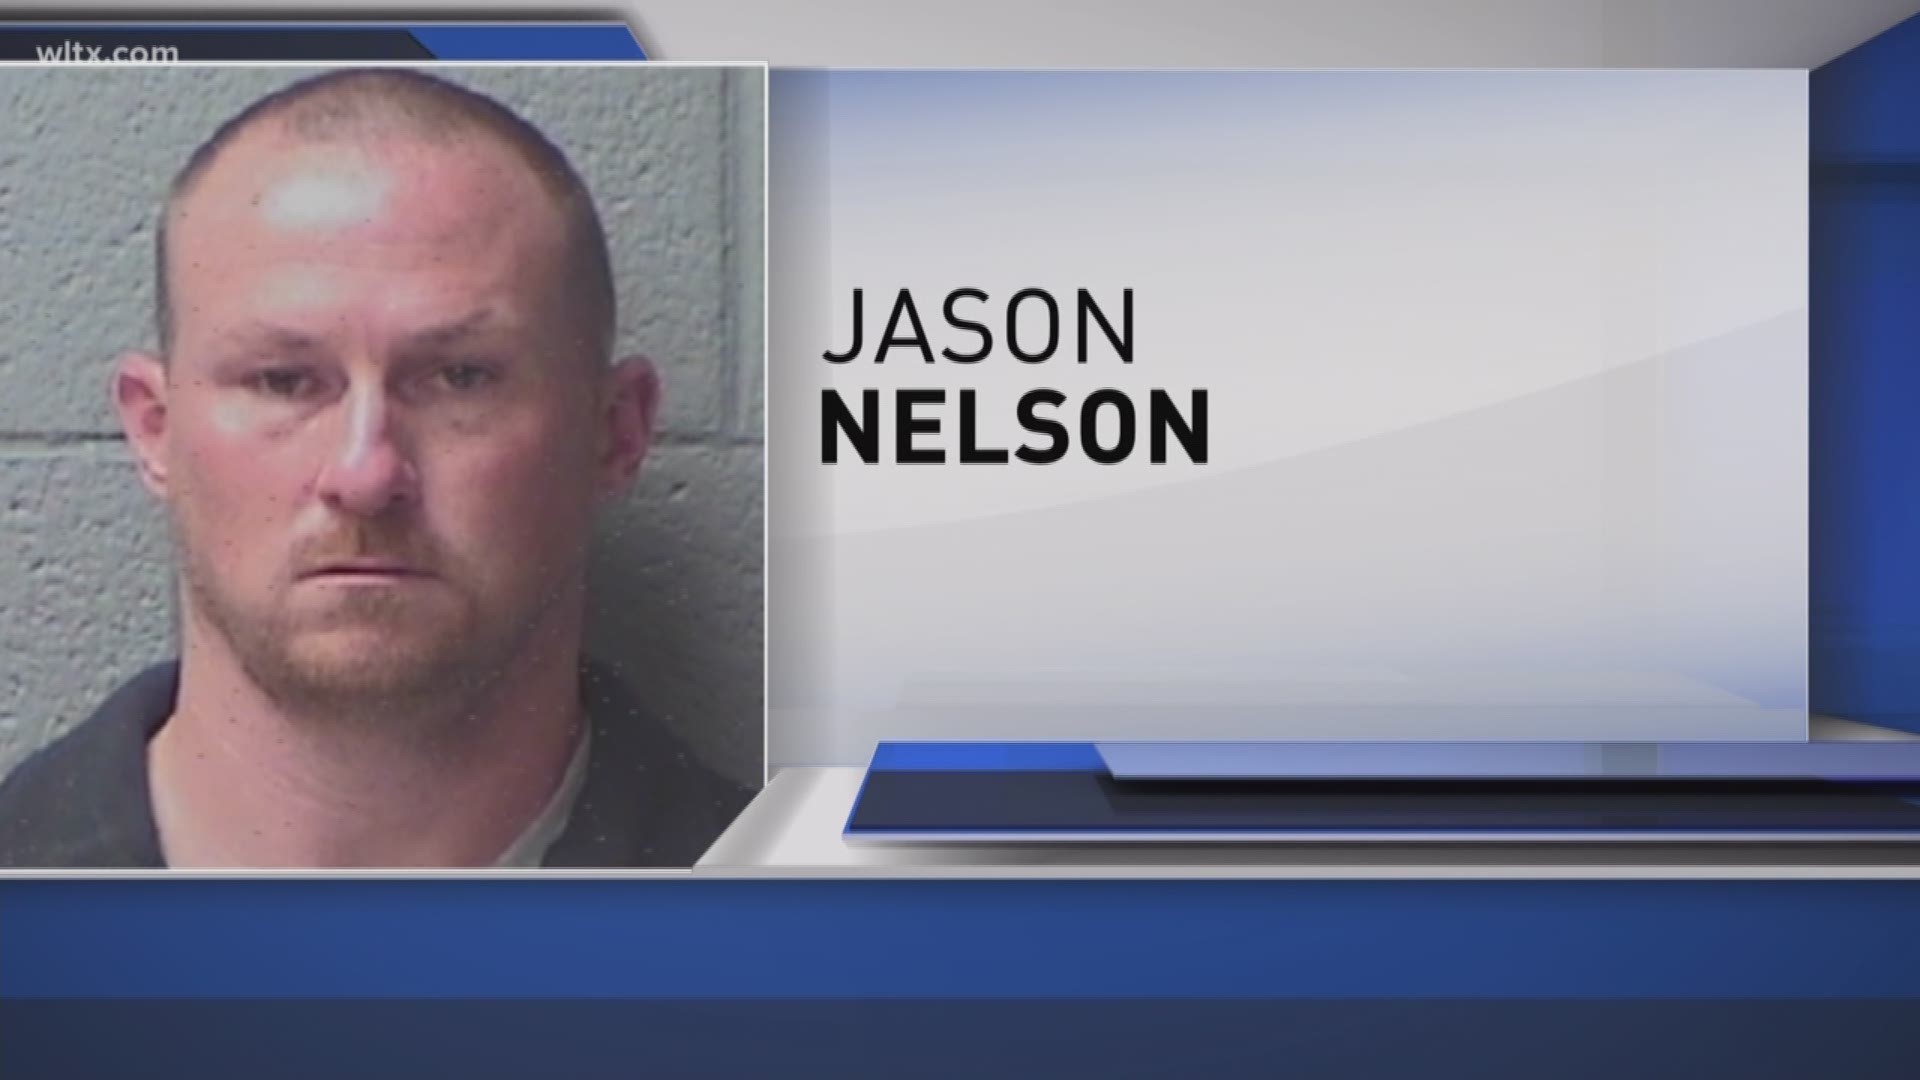 Jason Kip Nelson is accused of sending pictures and asking for sex from women involved in criminal investigations.